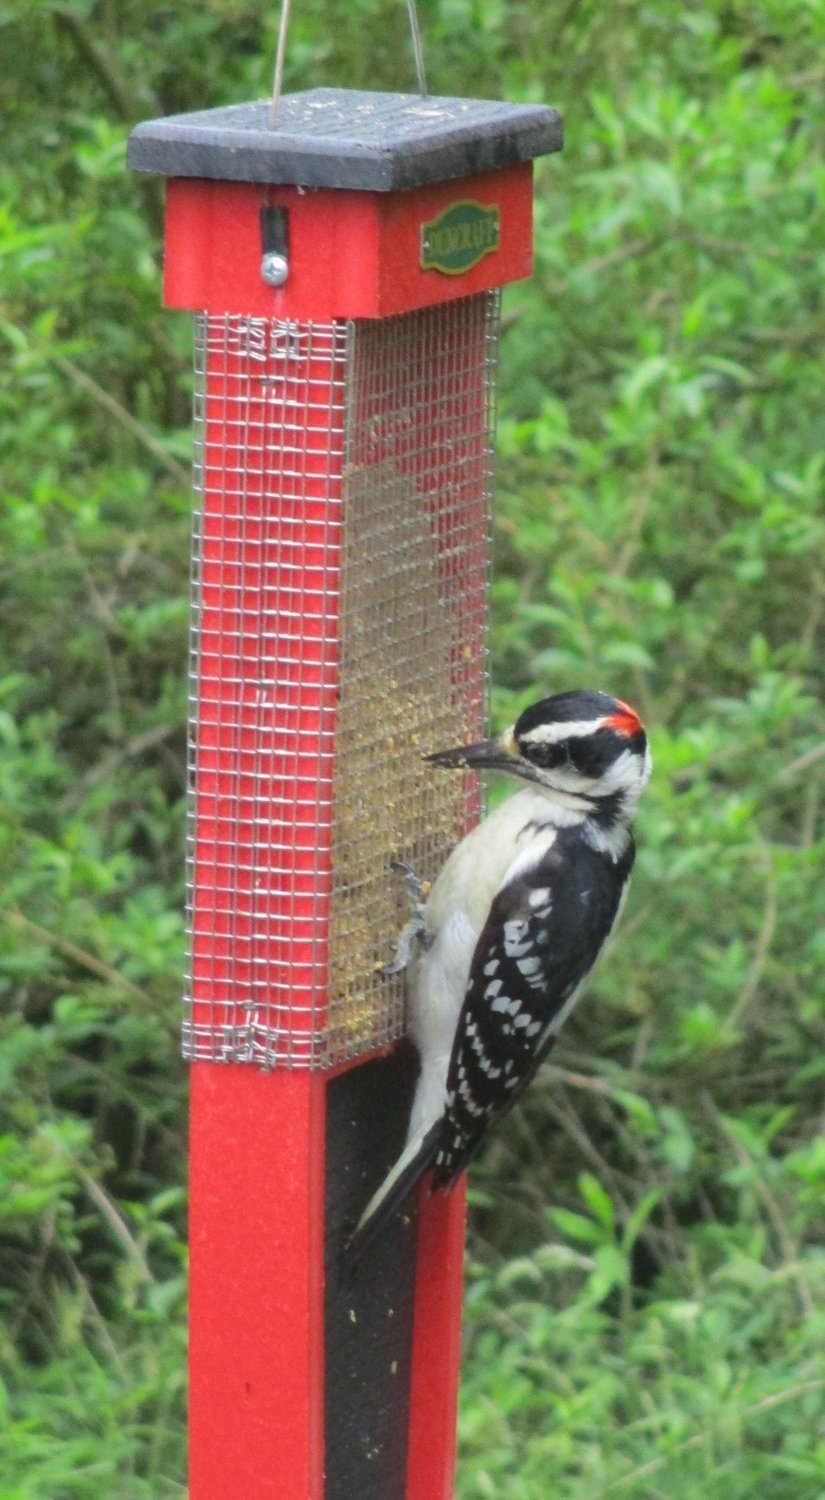 A downy woodpecker at work at the bird feeder.